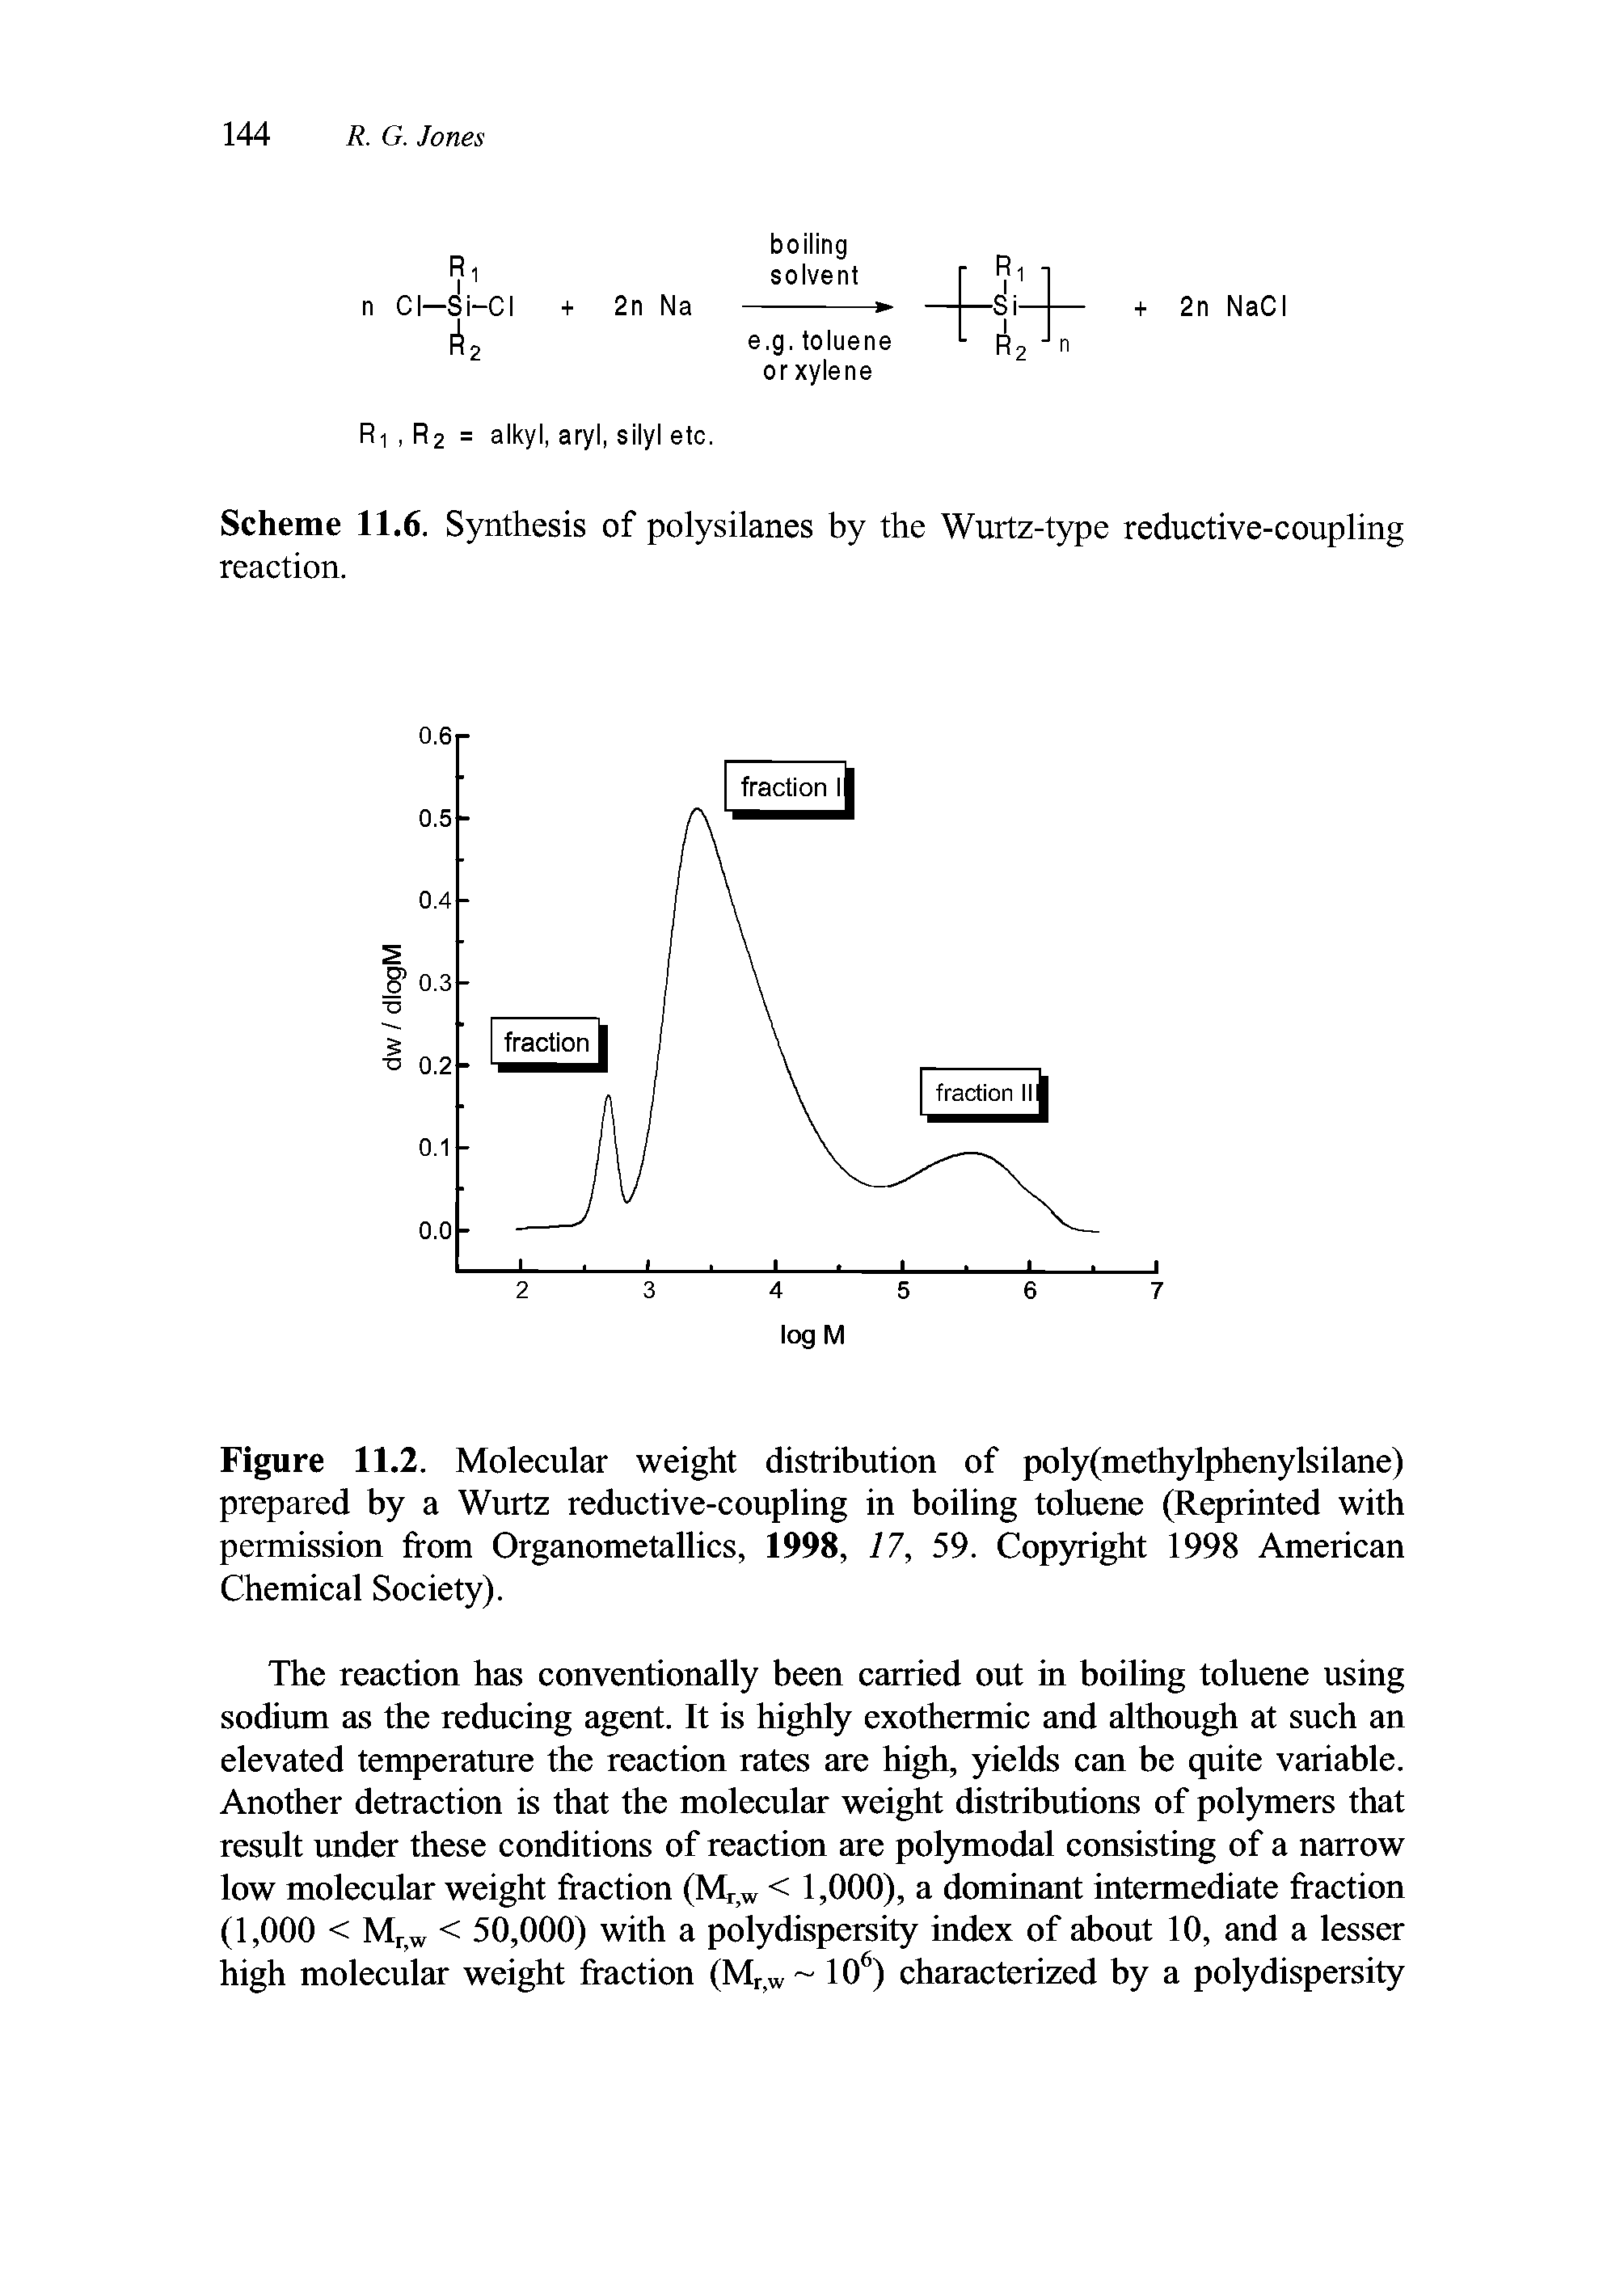 Figure 11.2. Molecular weight distribution of poly(methylphenylsilane) prepared by a Wurtz reductive-coupling in boiling toluene (Reprinted with permission from Organometallics, 1998, 17, 59. Copyright 1998 American Chemical Society).